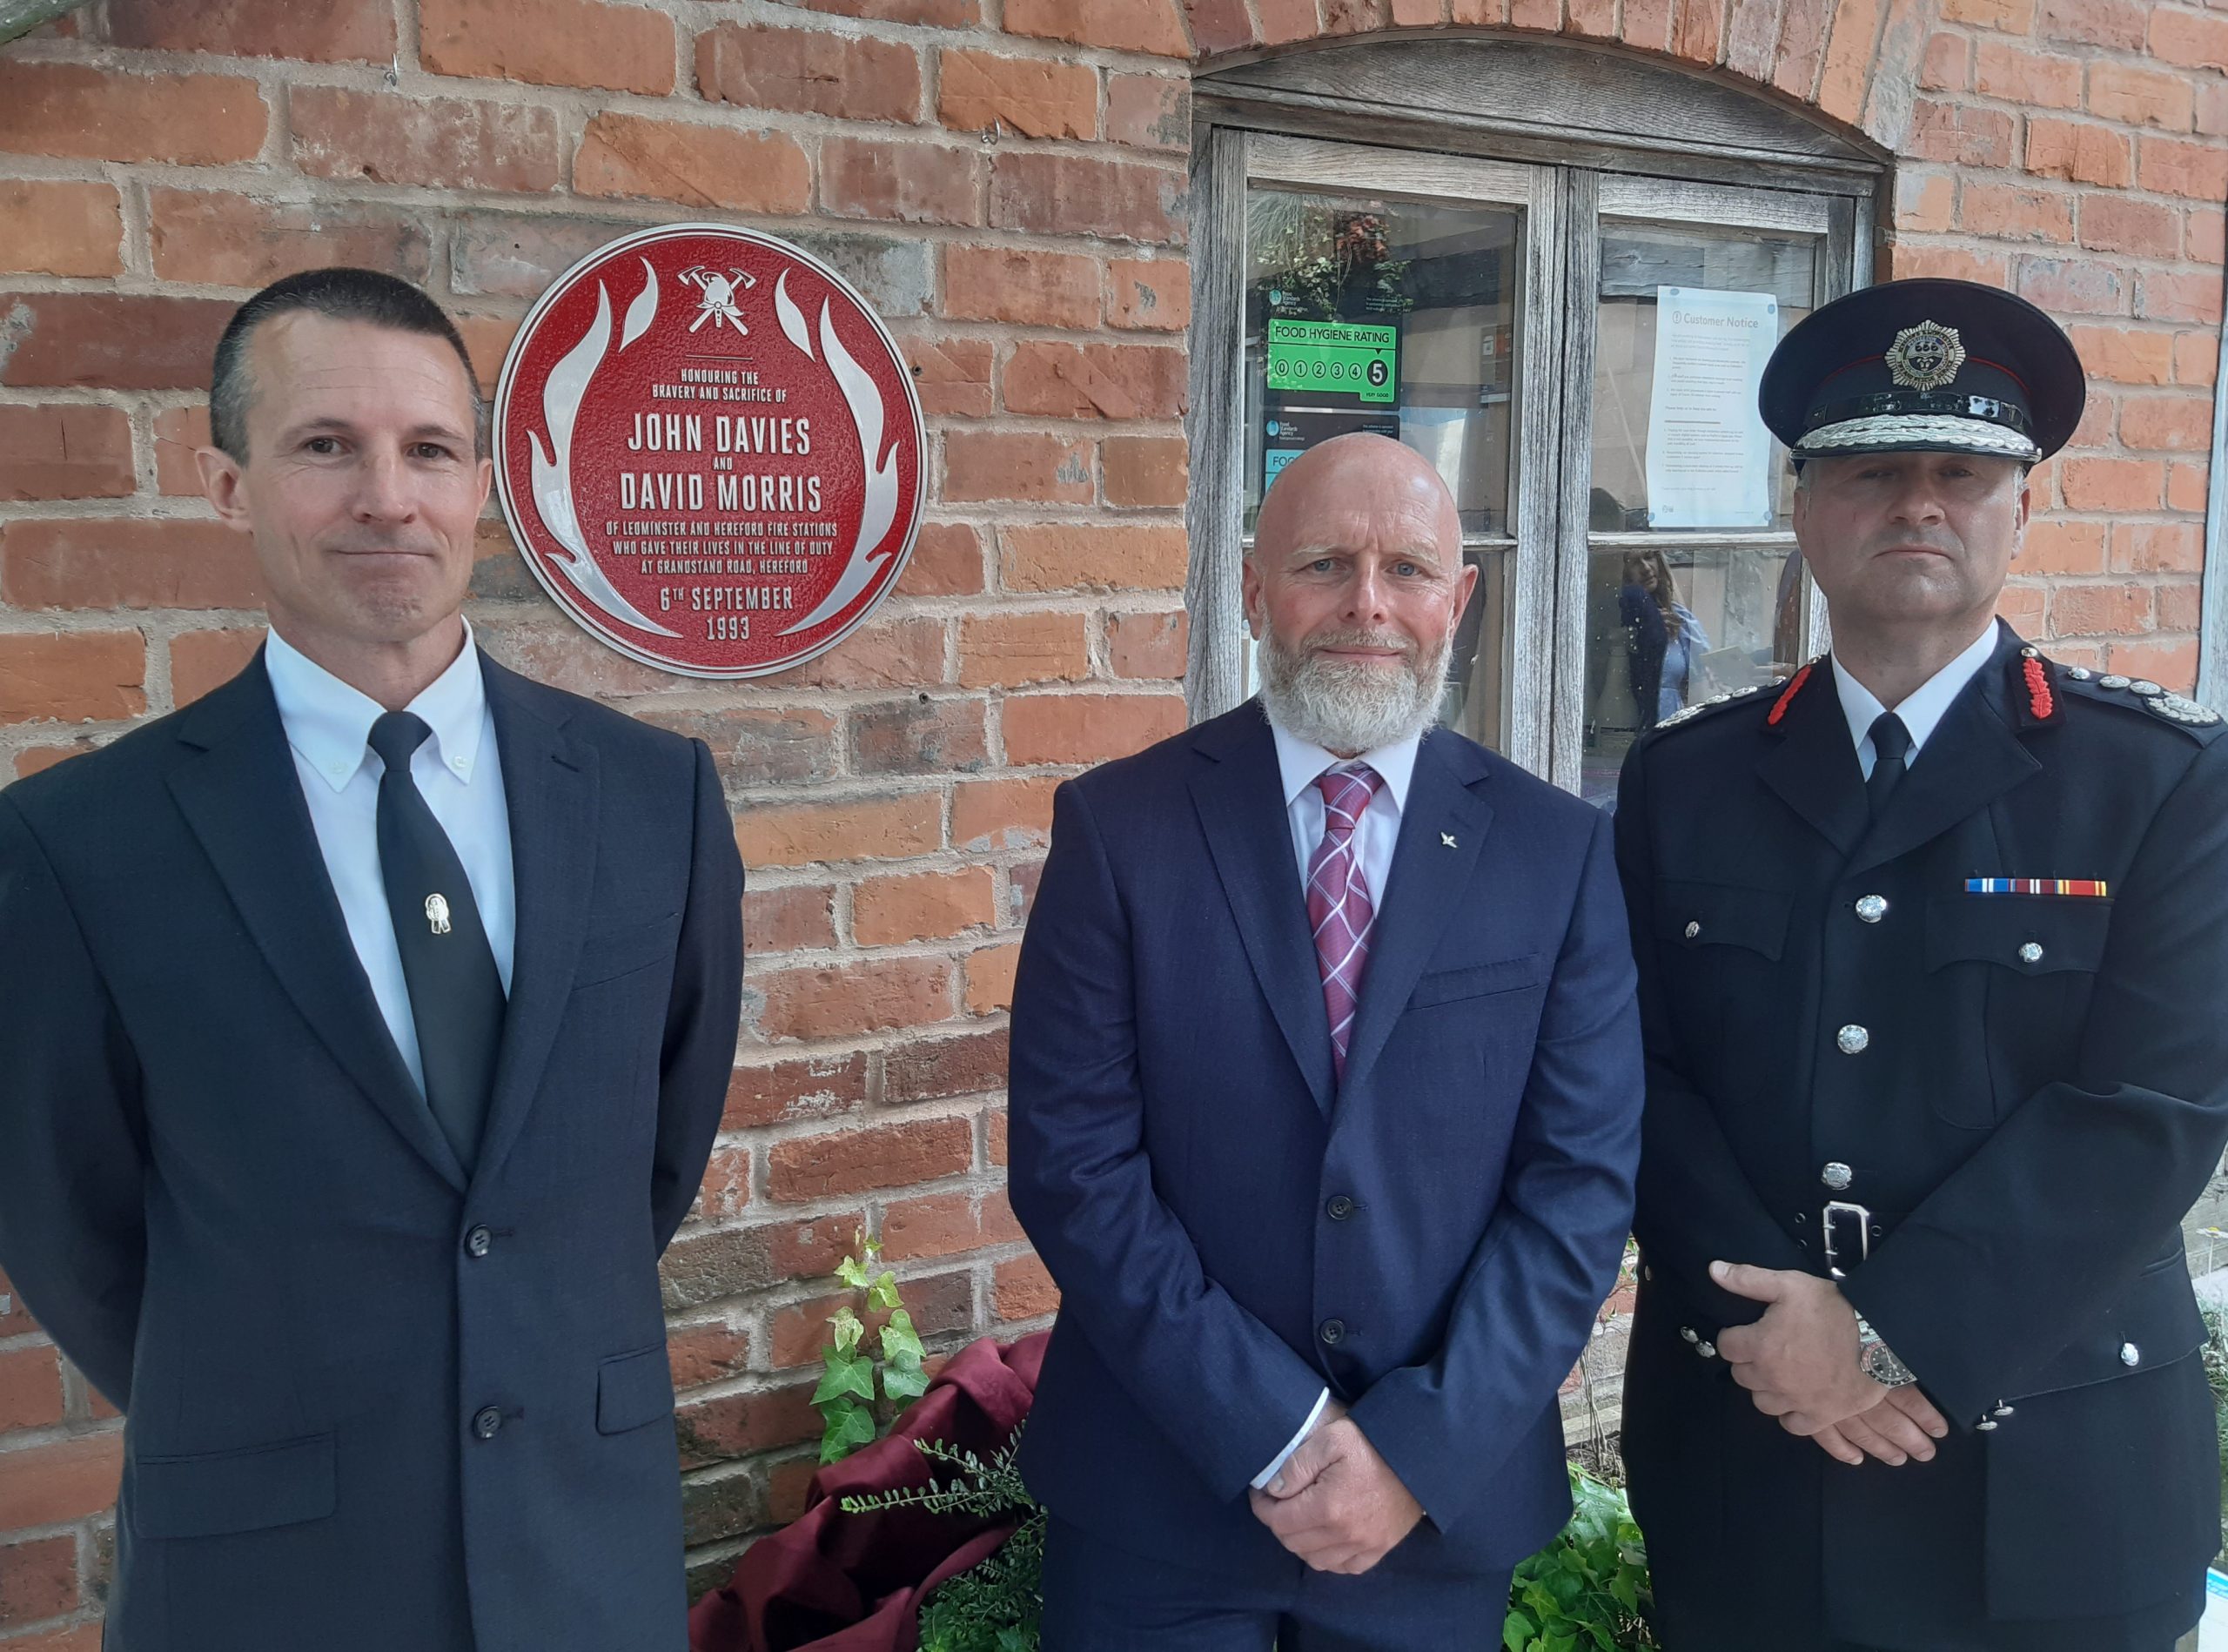 NEWS | Firefighters who made the ultimate sacrifice in Sun Valley fire in 1993 honoured with Red Plaque